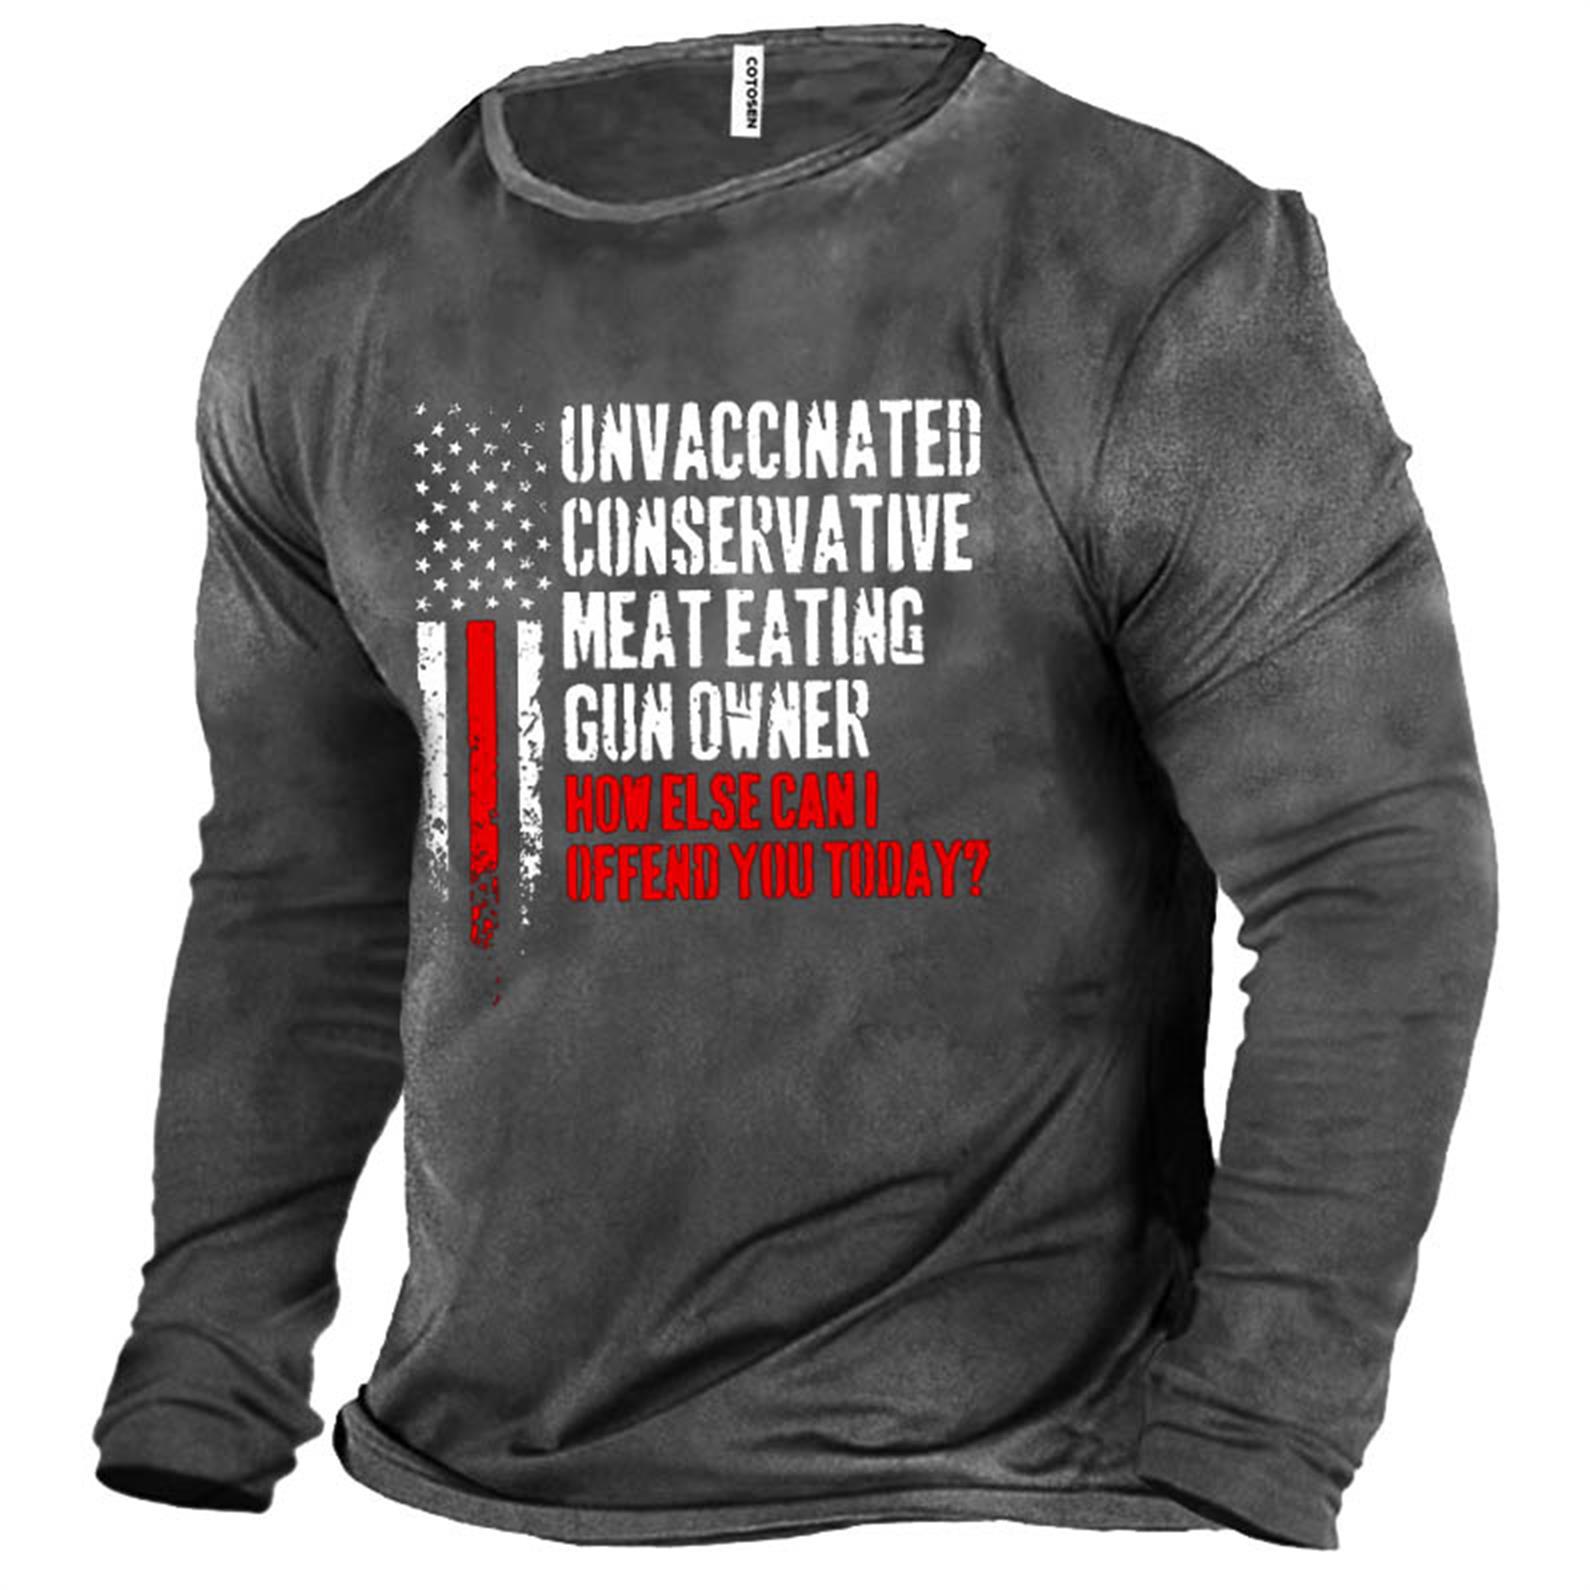 Men's Unvaccinated Conservative Cotton Chic Long Sleeve T-shirt